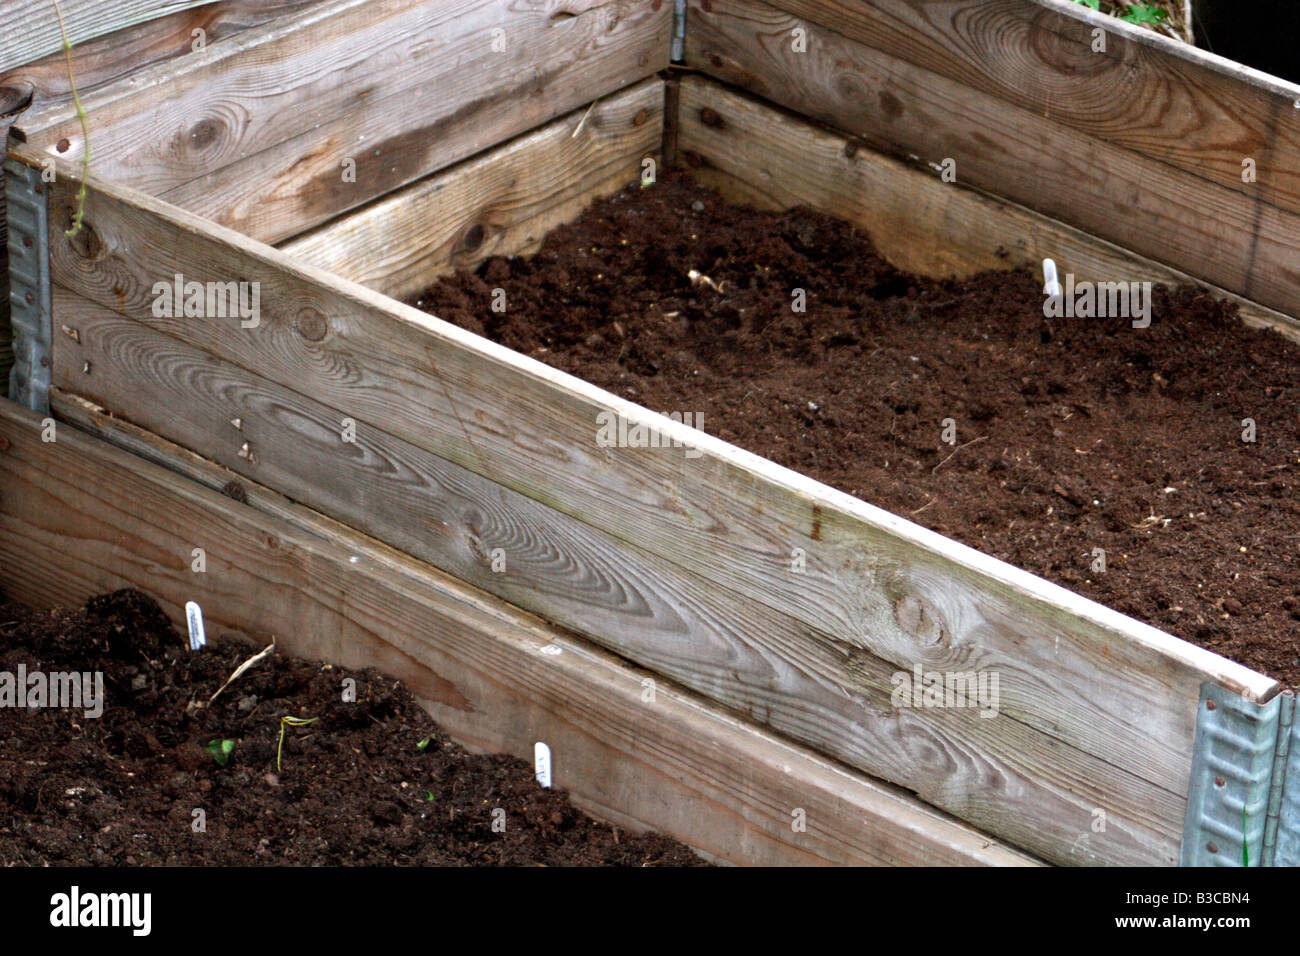 Raised vegetable bed made from old interlocking crates Stock Photo